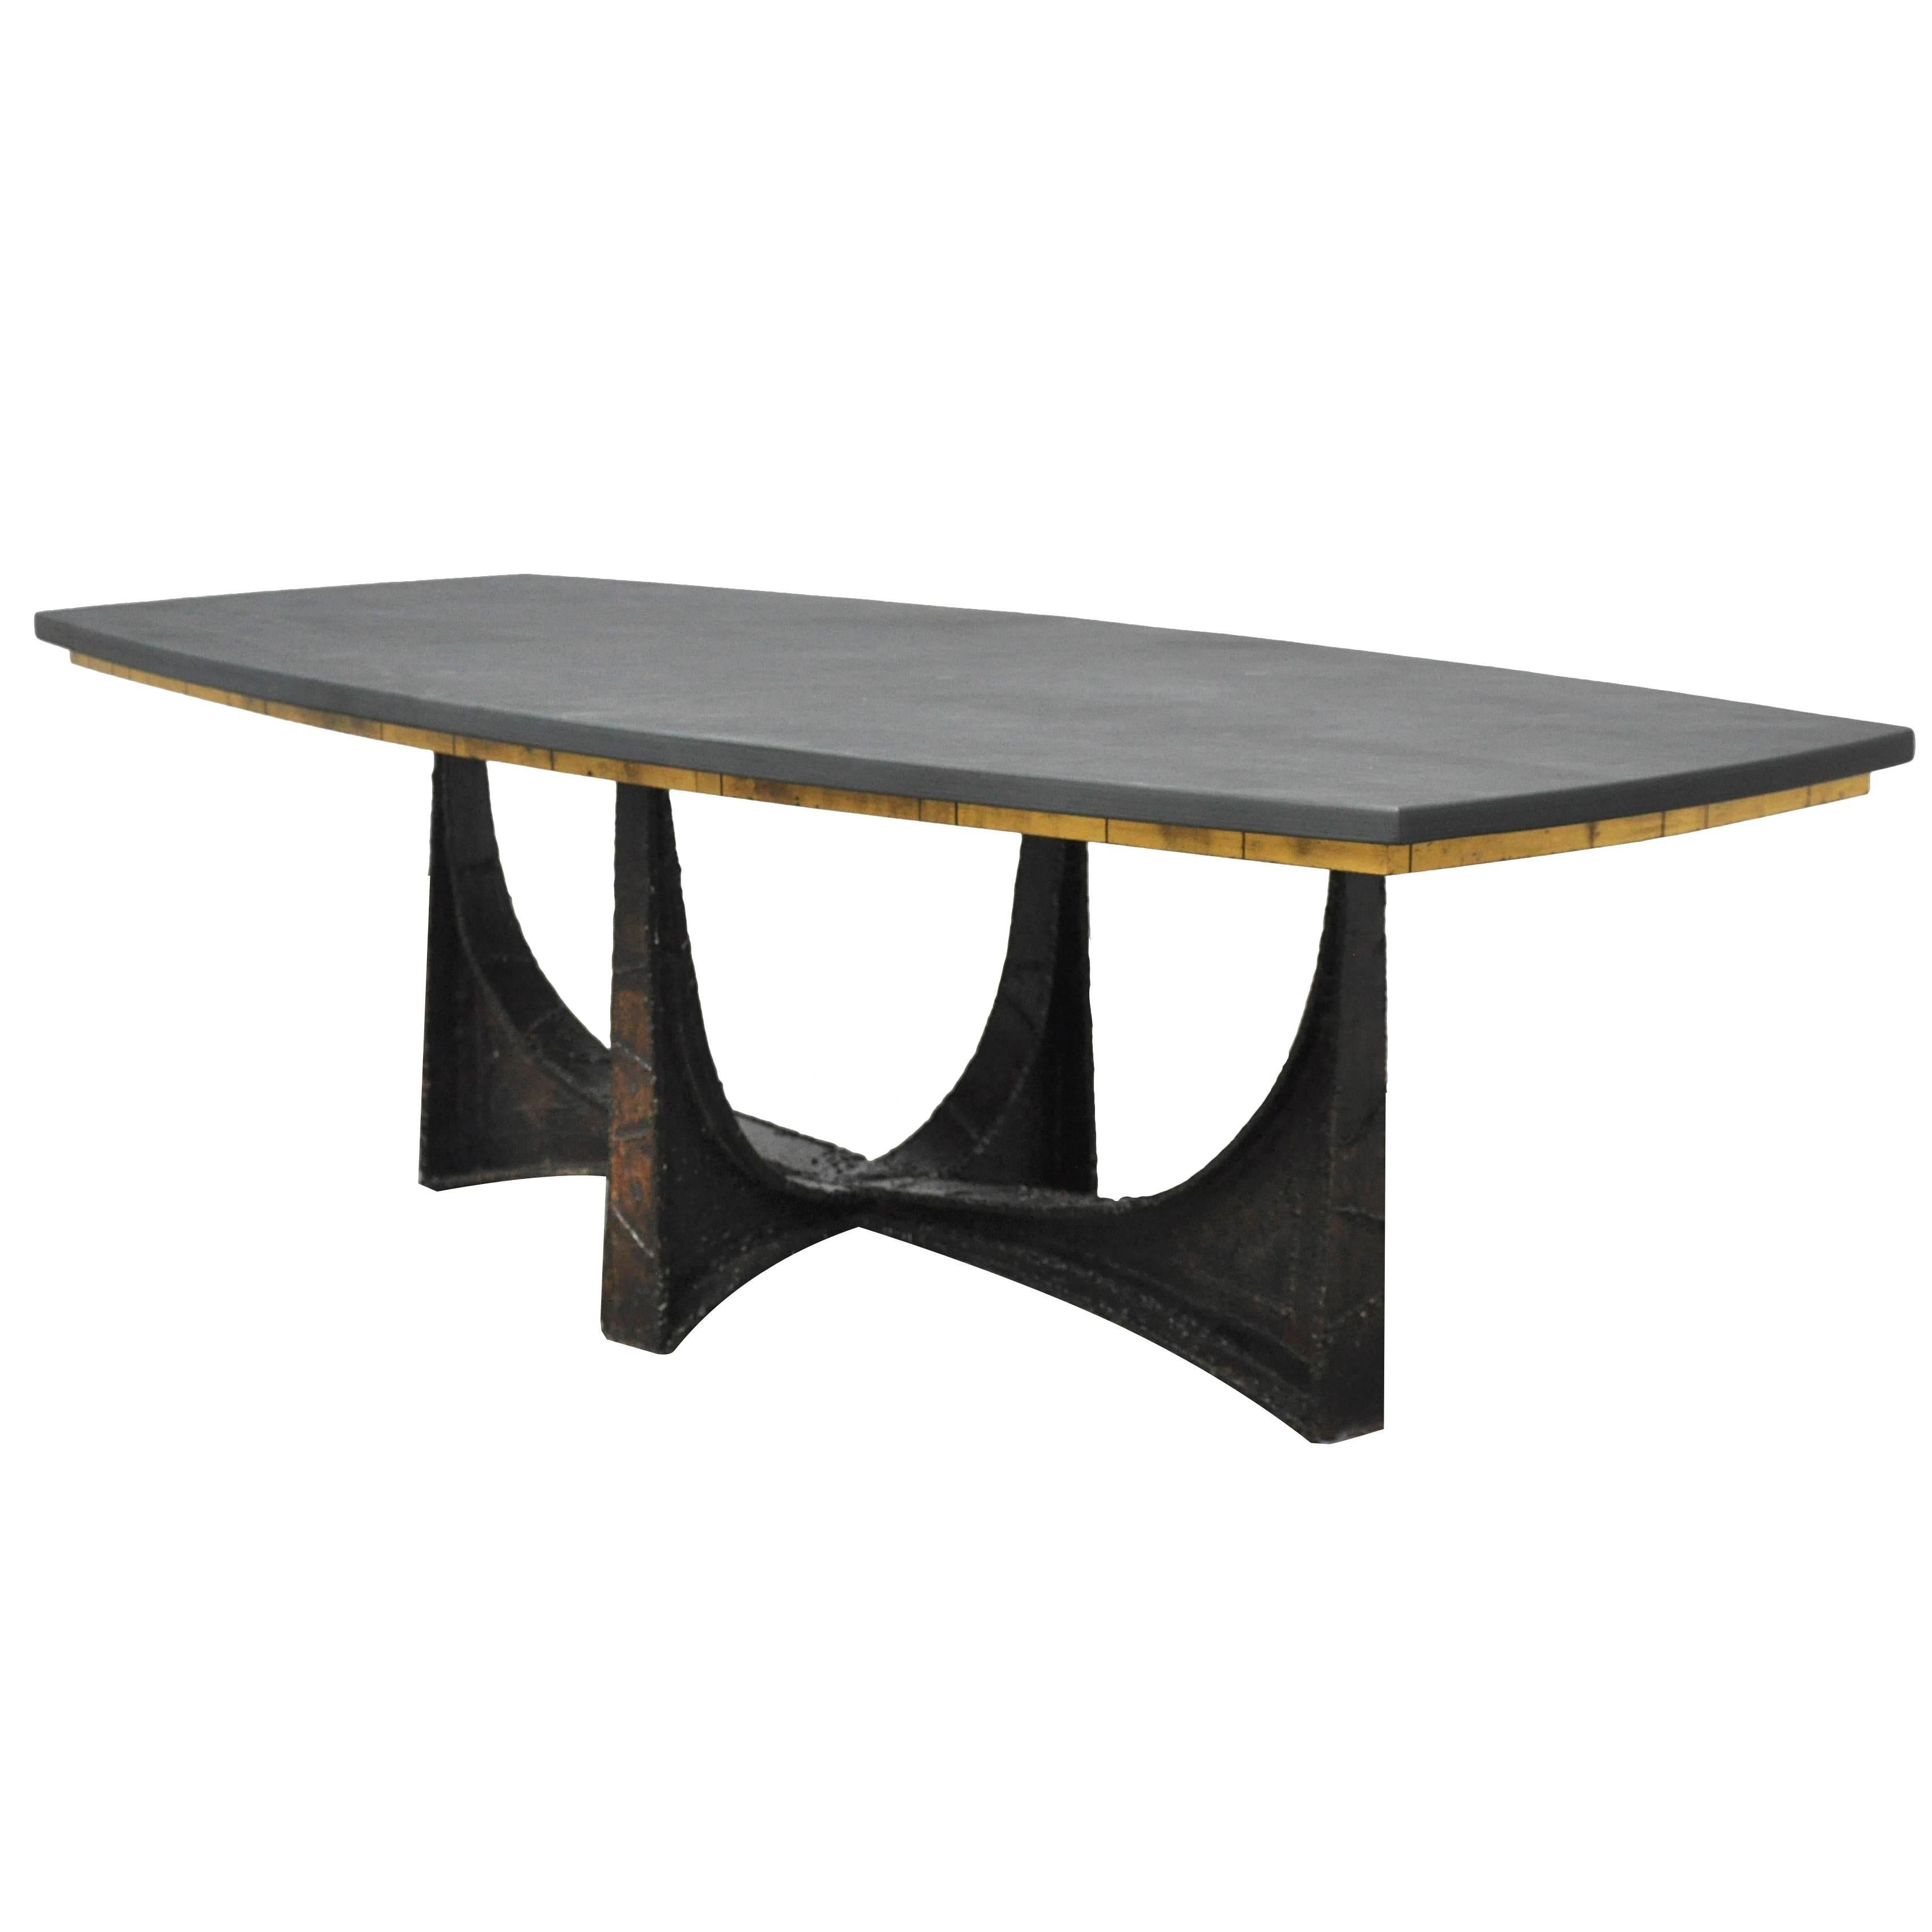 Rare and early coffee table by Paul Evans. Sculpture base of made of forged steel. Slate top with gold leaf apron. Welded signature to underside of base: 